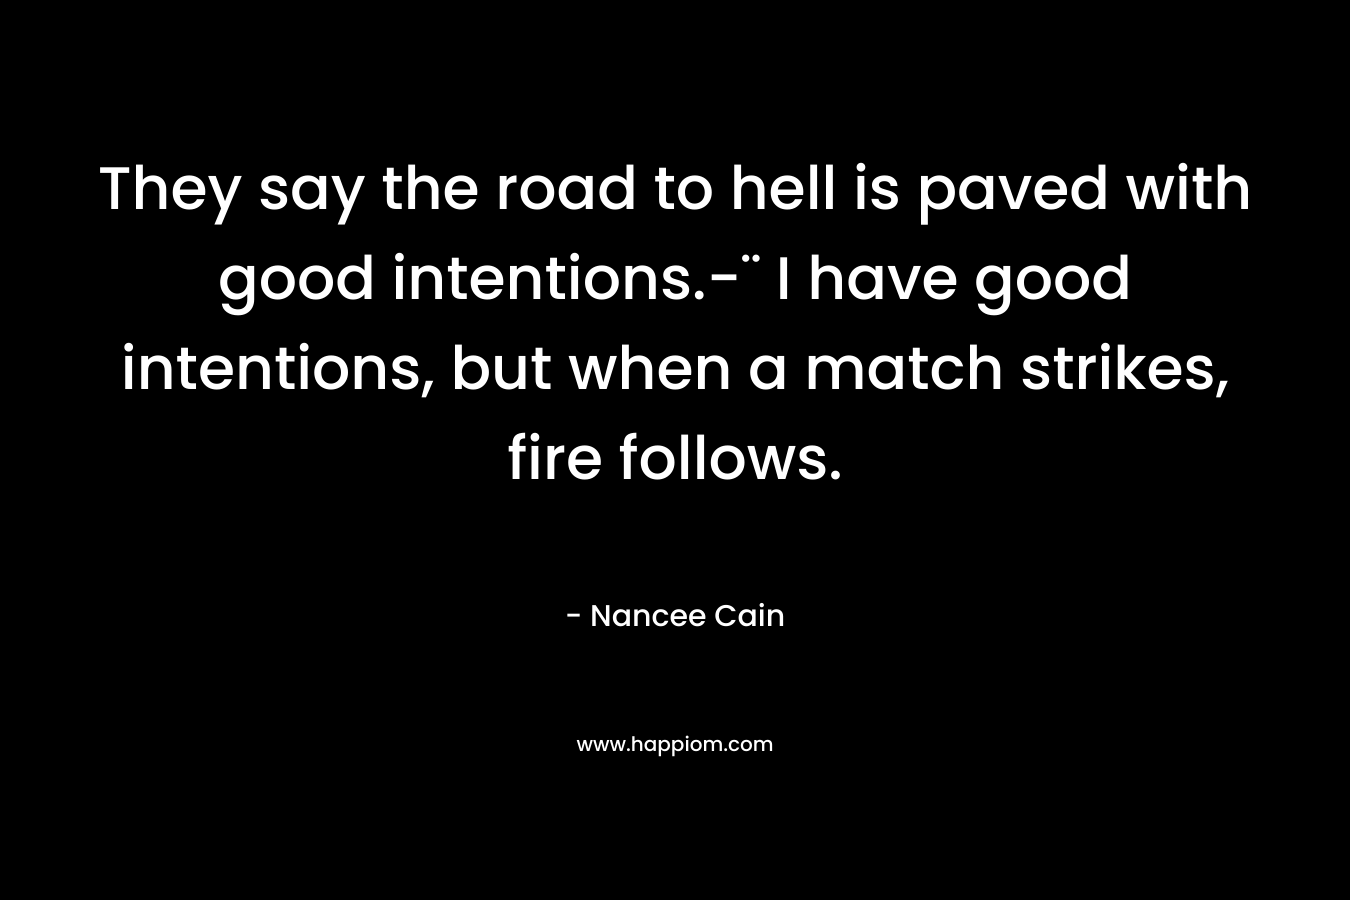 They say the road to hell is paved with good intentions.-¨ I have good intentions, but when a match strikes, fire follows. – Nancee Cain